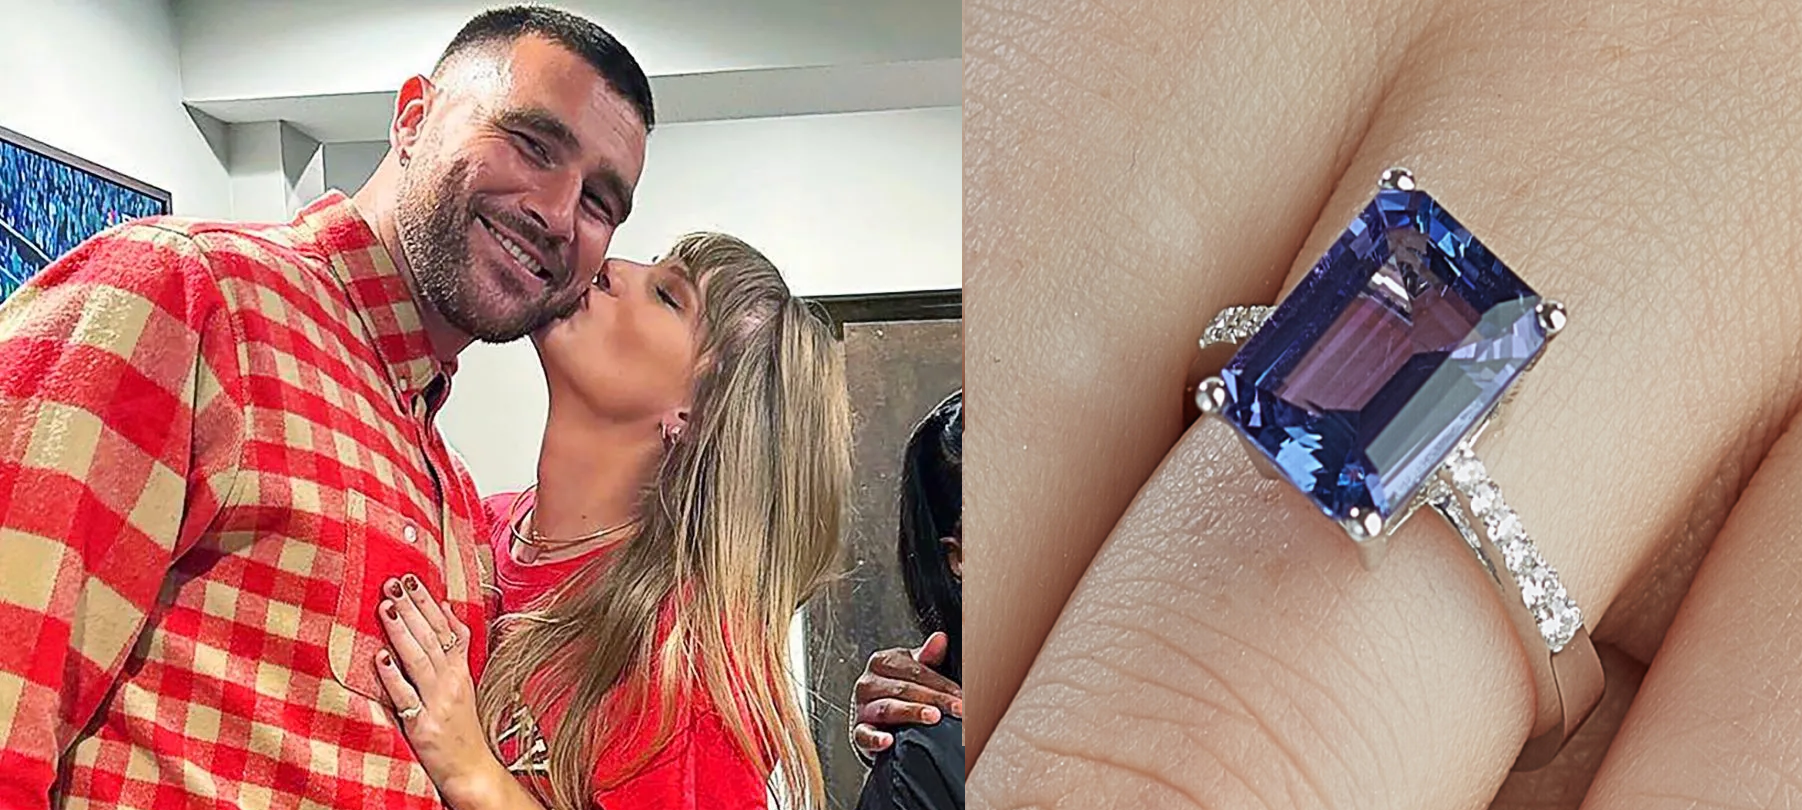 Travis Kelce continues to shower his love on Taylor Swift, showcasing the jaw-dropping $45 million engagement ring he recently purchased for her.